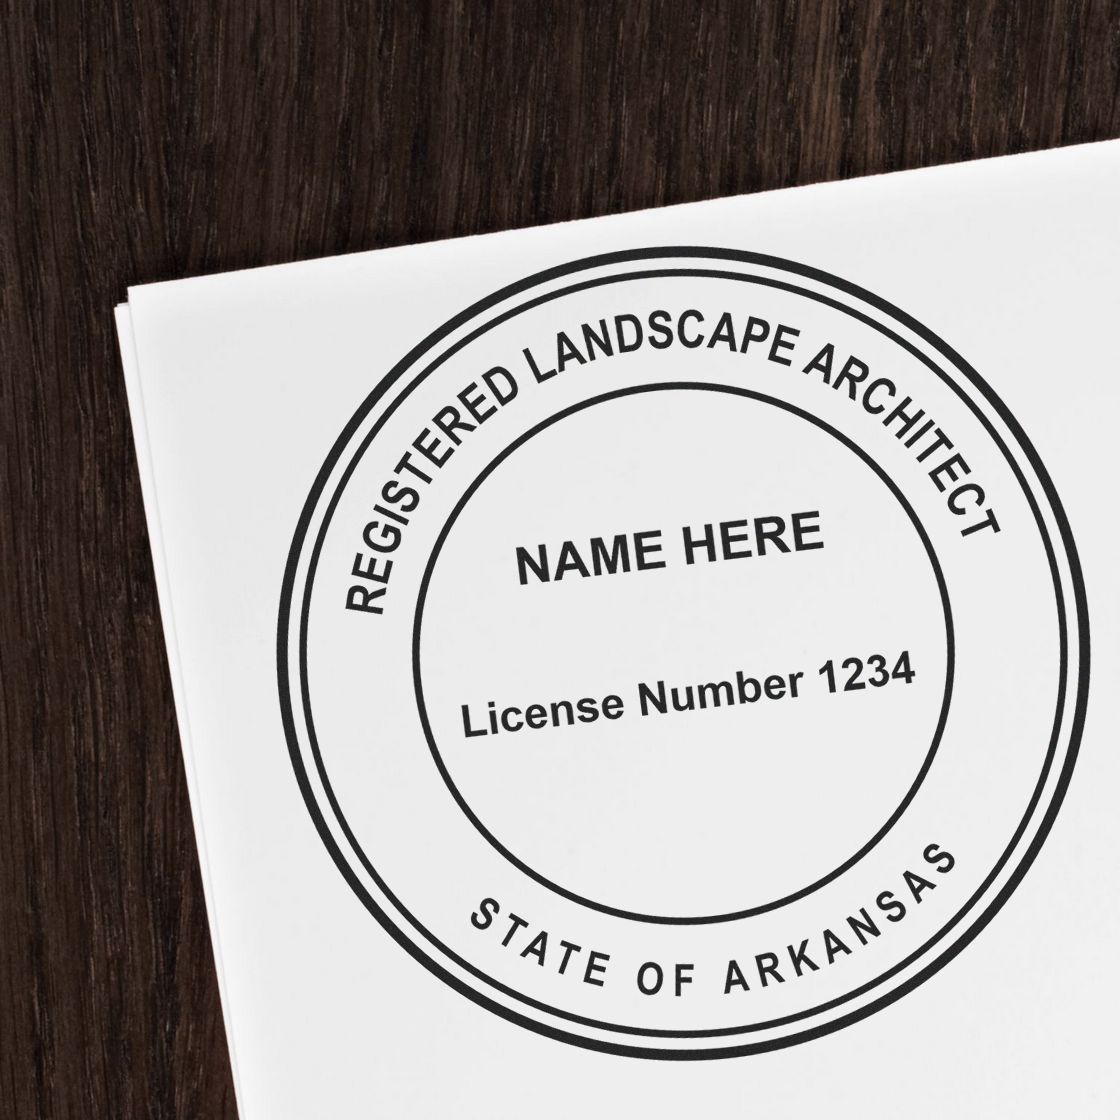 A stamped impression of the Digital Arkansas Landscape Architect Stamp in this stylish lifestyle photo, setting the tone for a unique and personalized product.